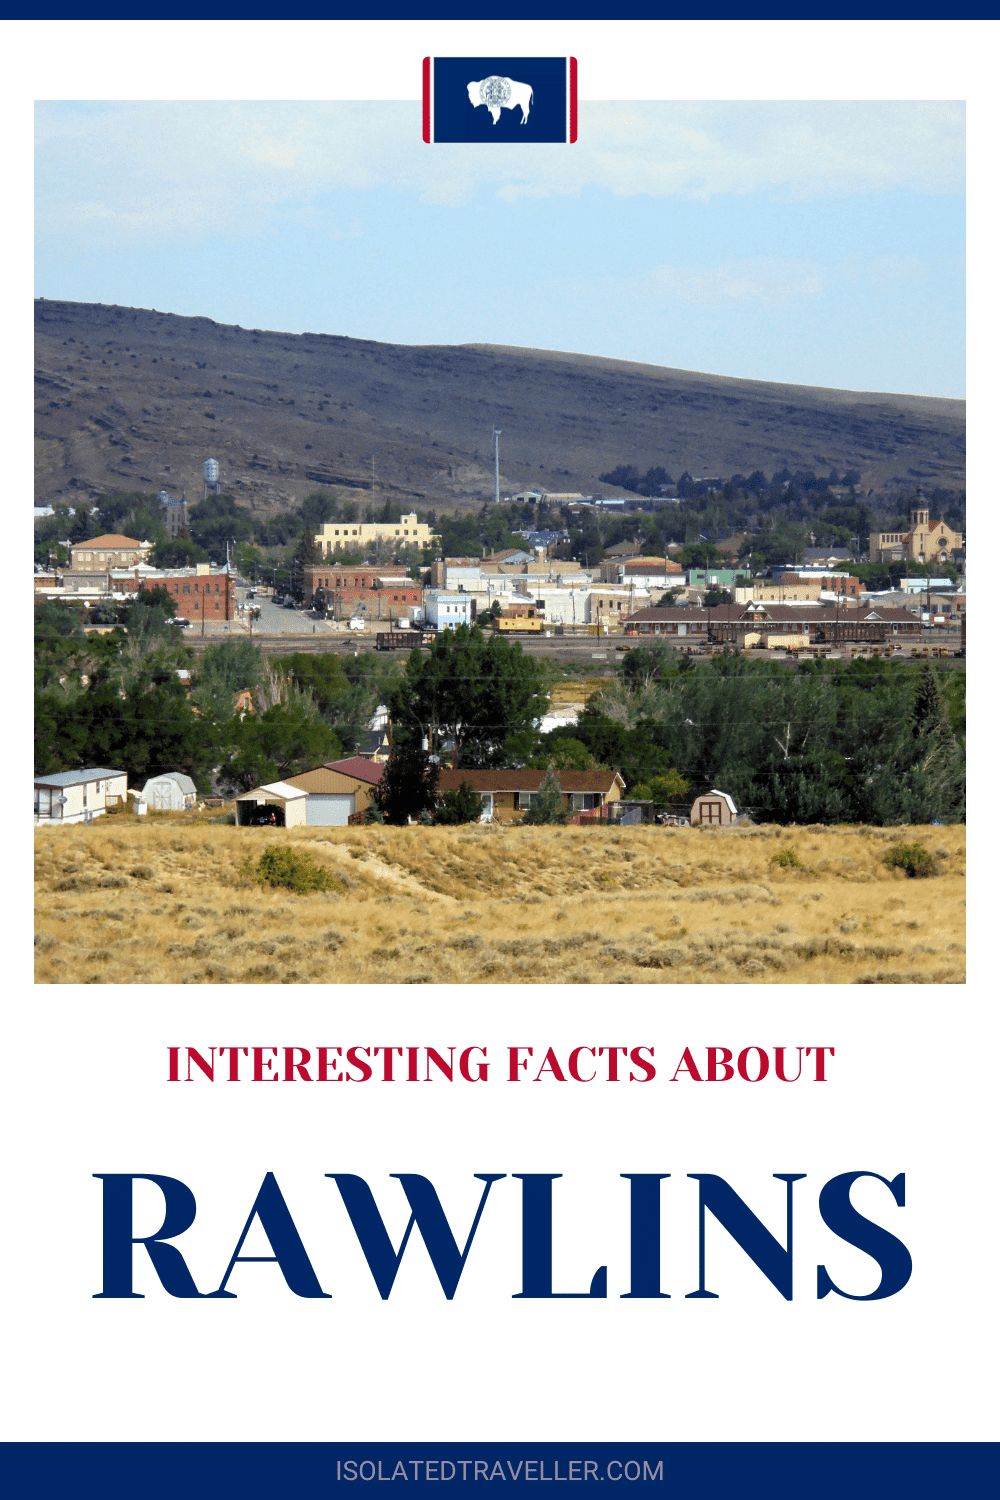 Facts About Rawlins, Wyoming